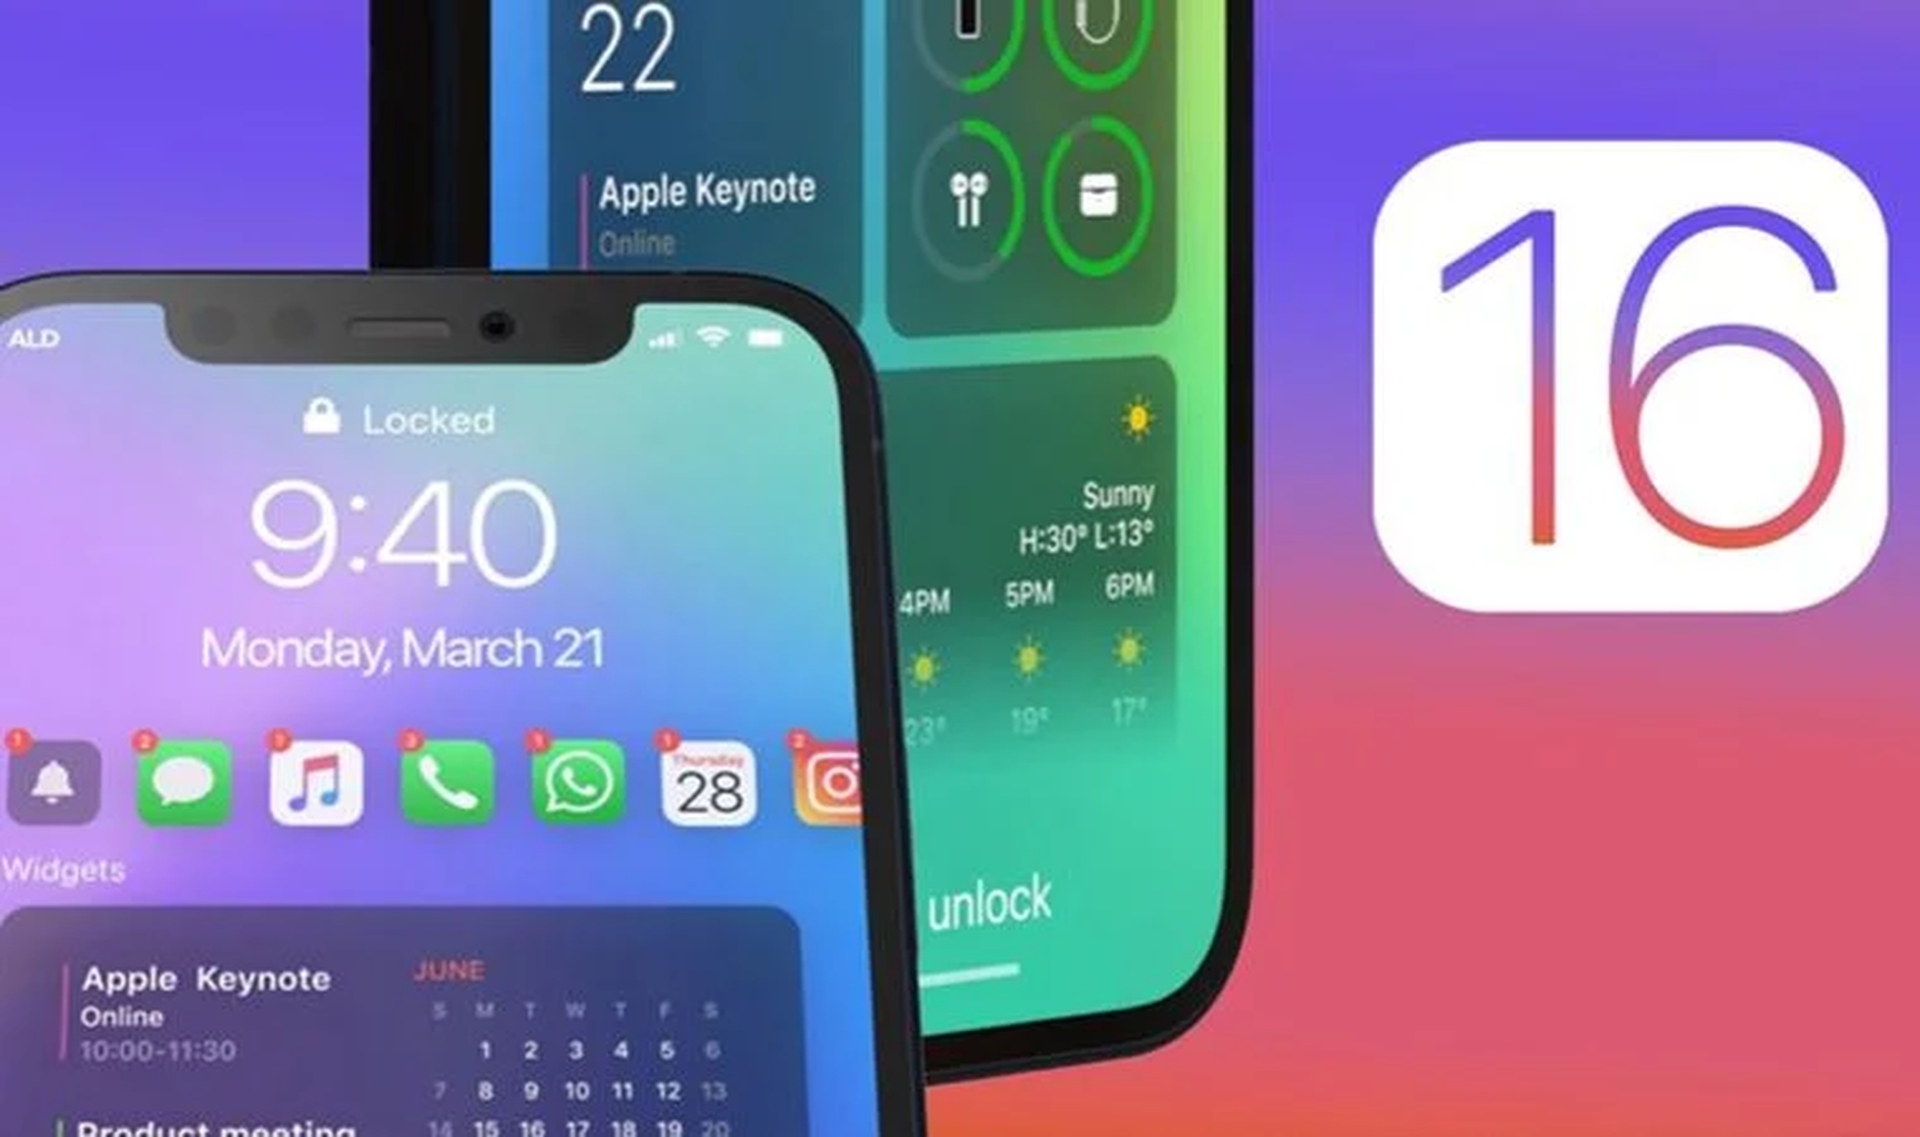 Today, we will be covering when is WWDC 2022 keynote and how to watch it, so you don't miss the annual event that Apple unveils new features for their devices.